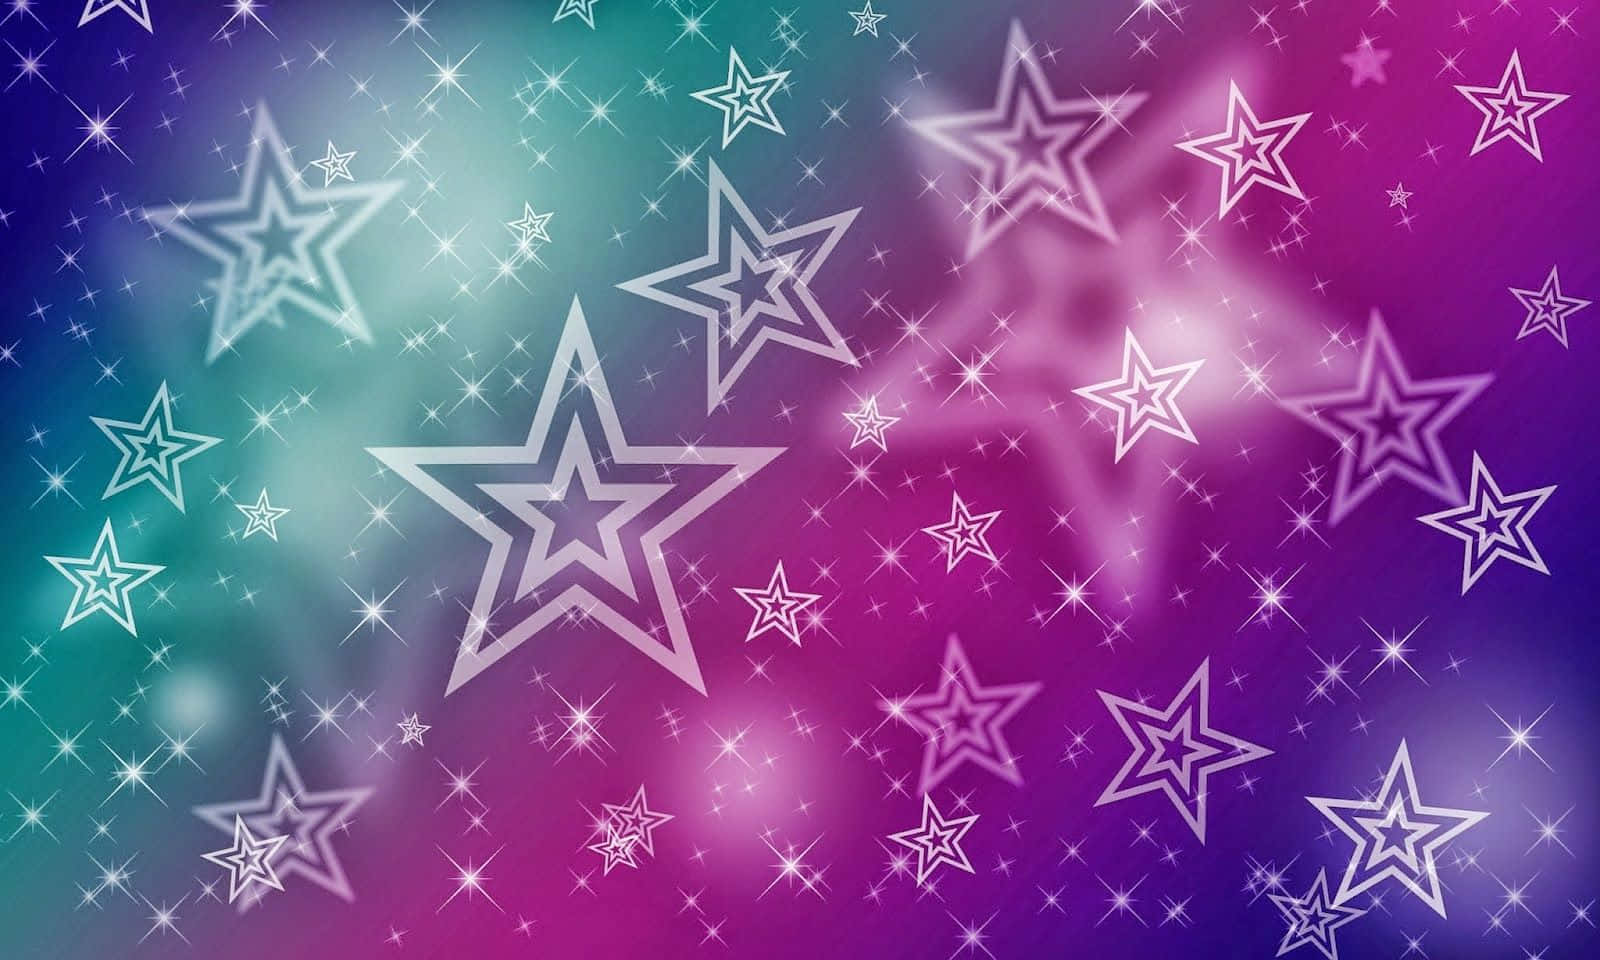 Make A Wish Upon This Aesthetic Star